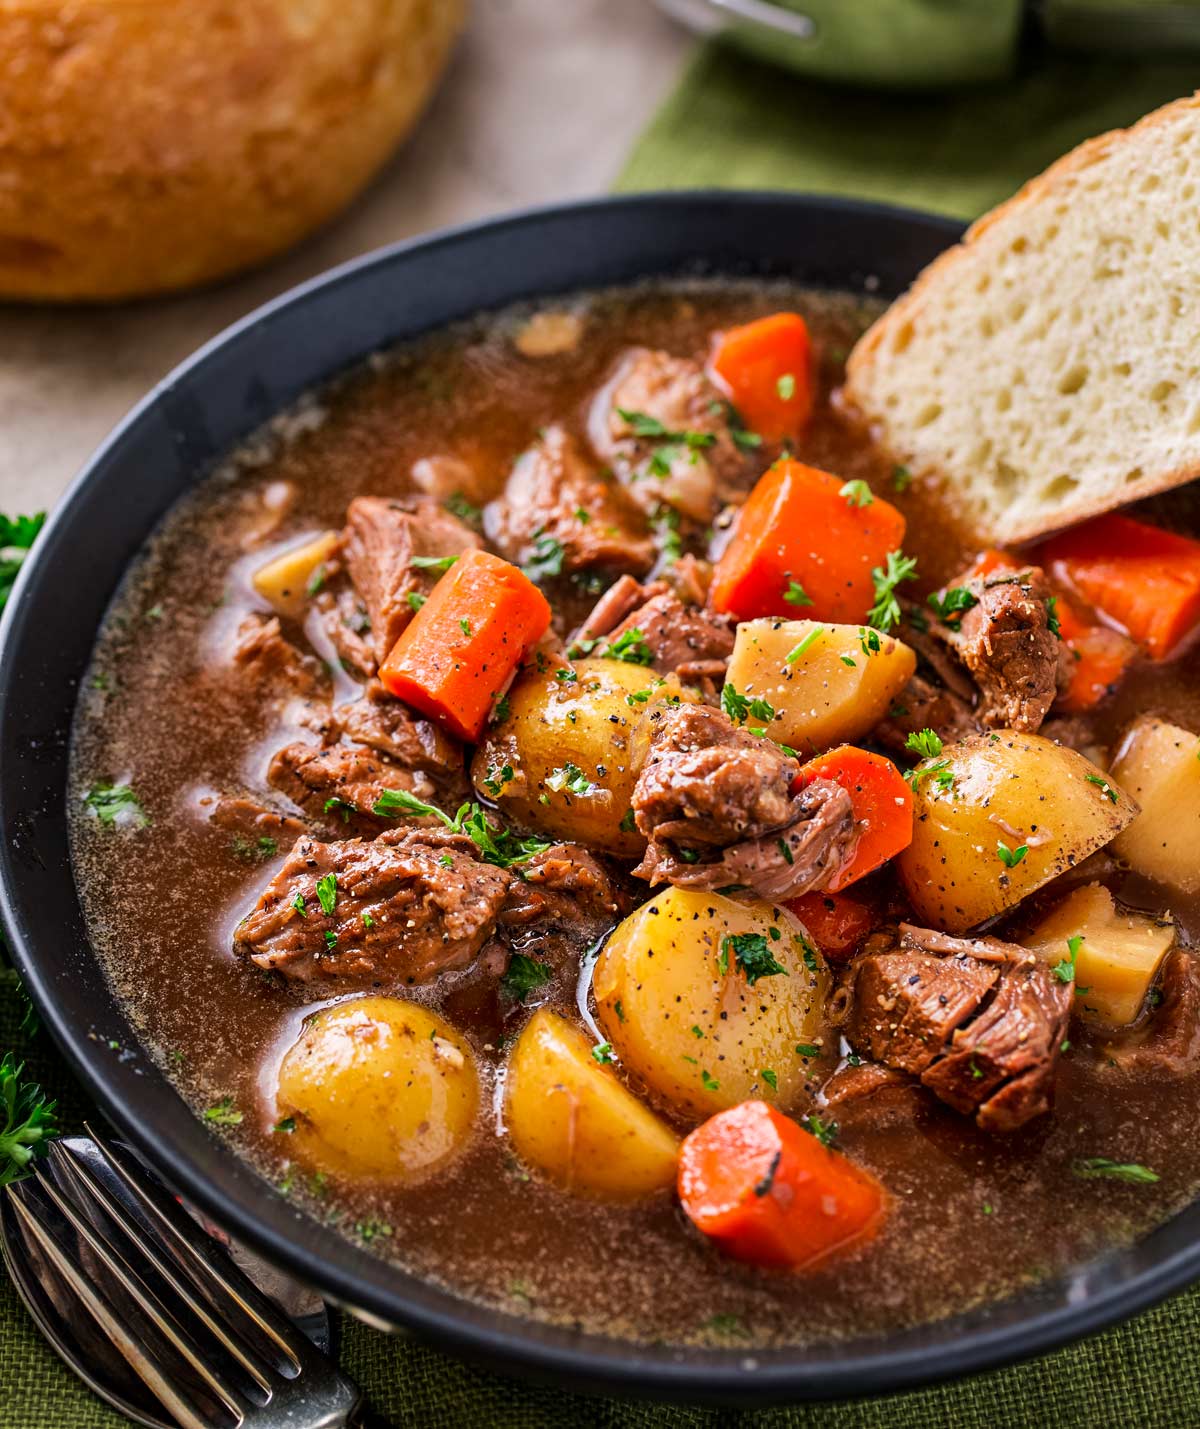 Crockpot Beef Stew with beer and horseradish in a bowl with bread